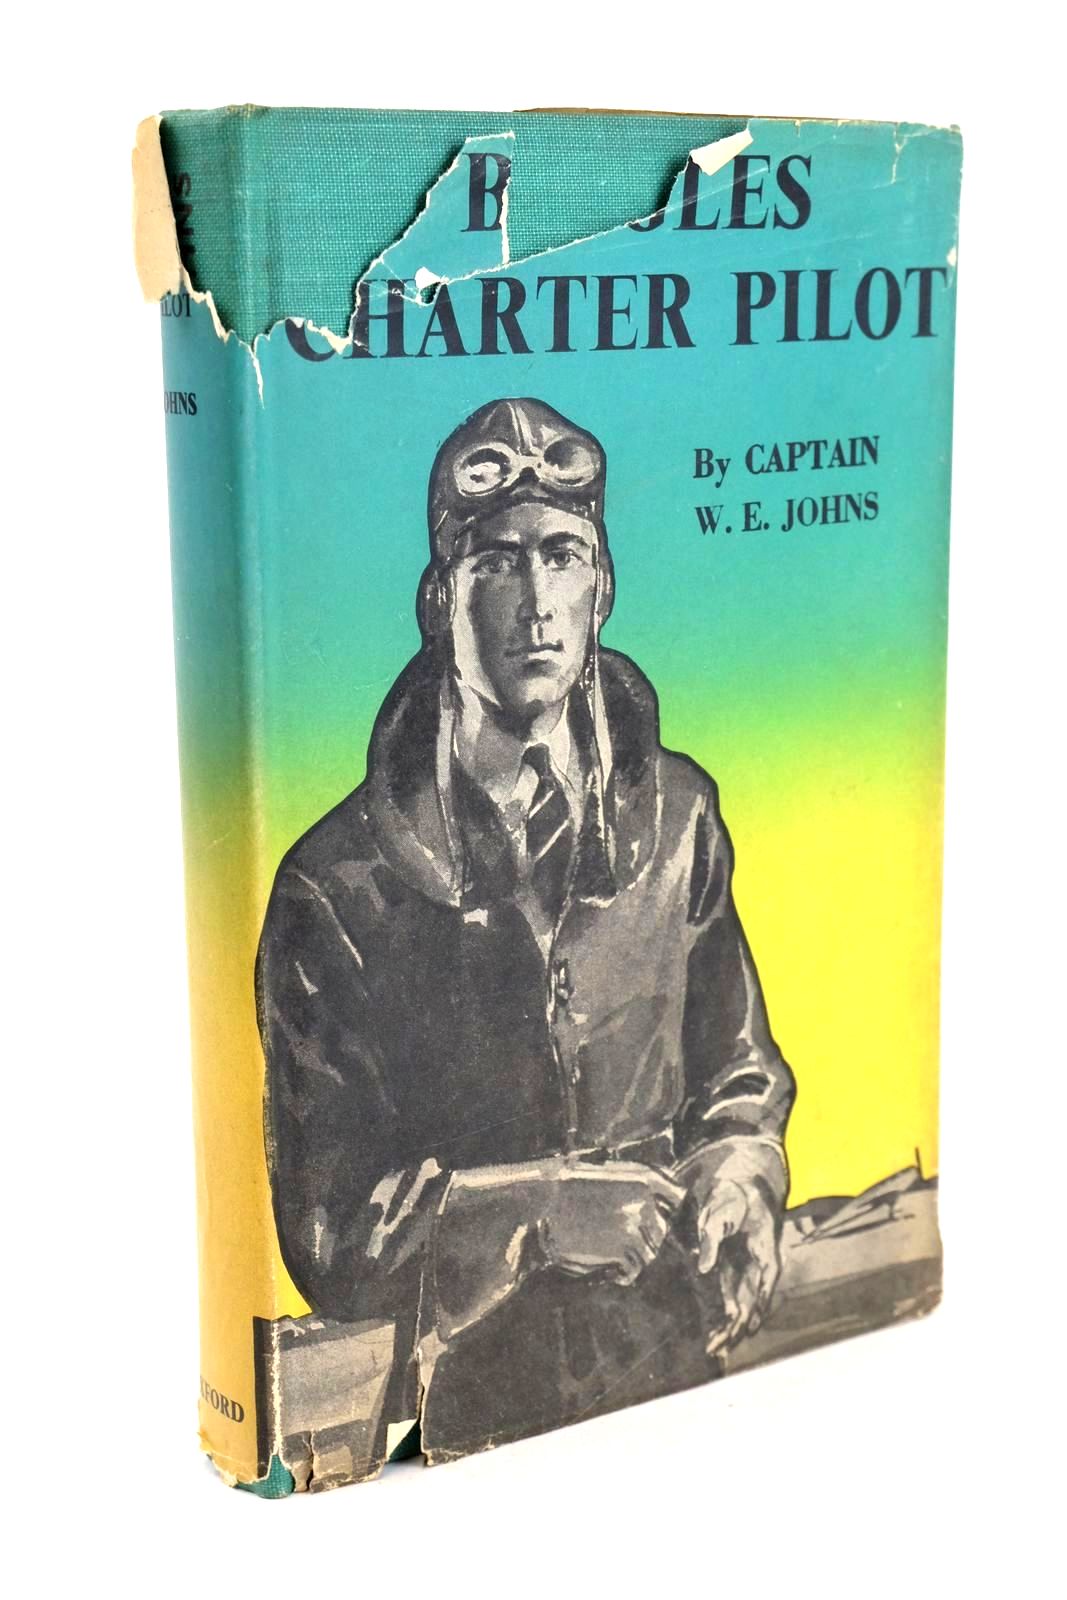 Photo of BIGGLES - CHARTER PILOT written by Johns, W.E. illustrated by Mendoza,  published by Oxford University Press, Geoffrey Cumberlege (STOCK CODE: 1326484)  for sale by Stella & Rose's Books